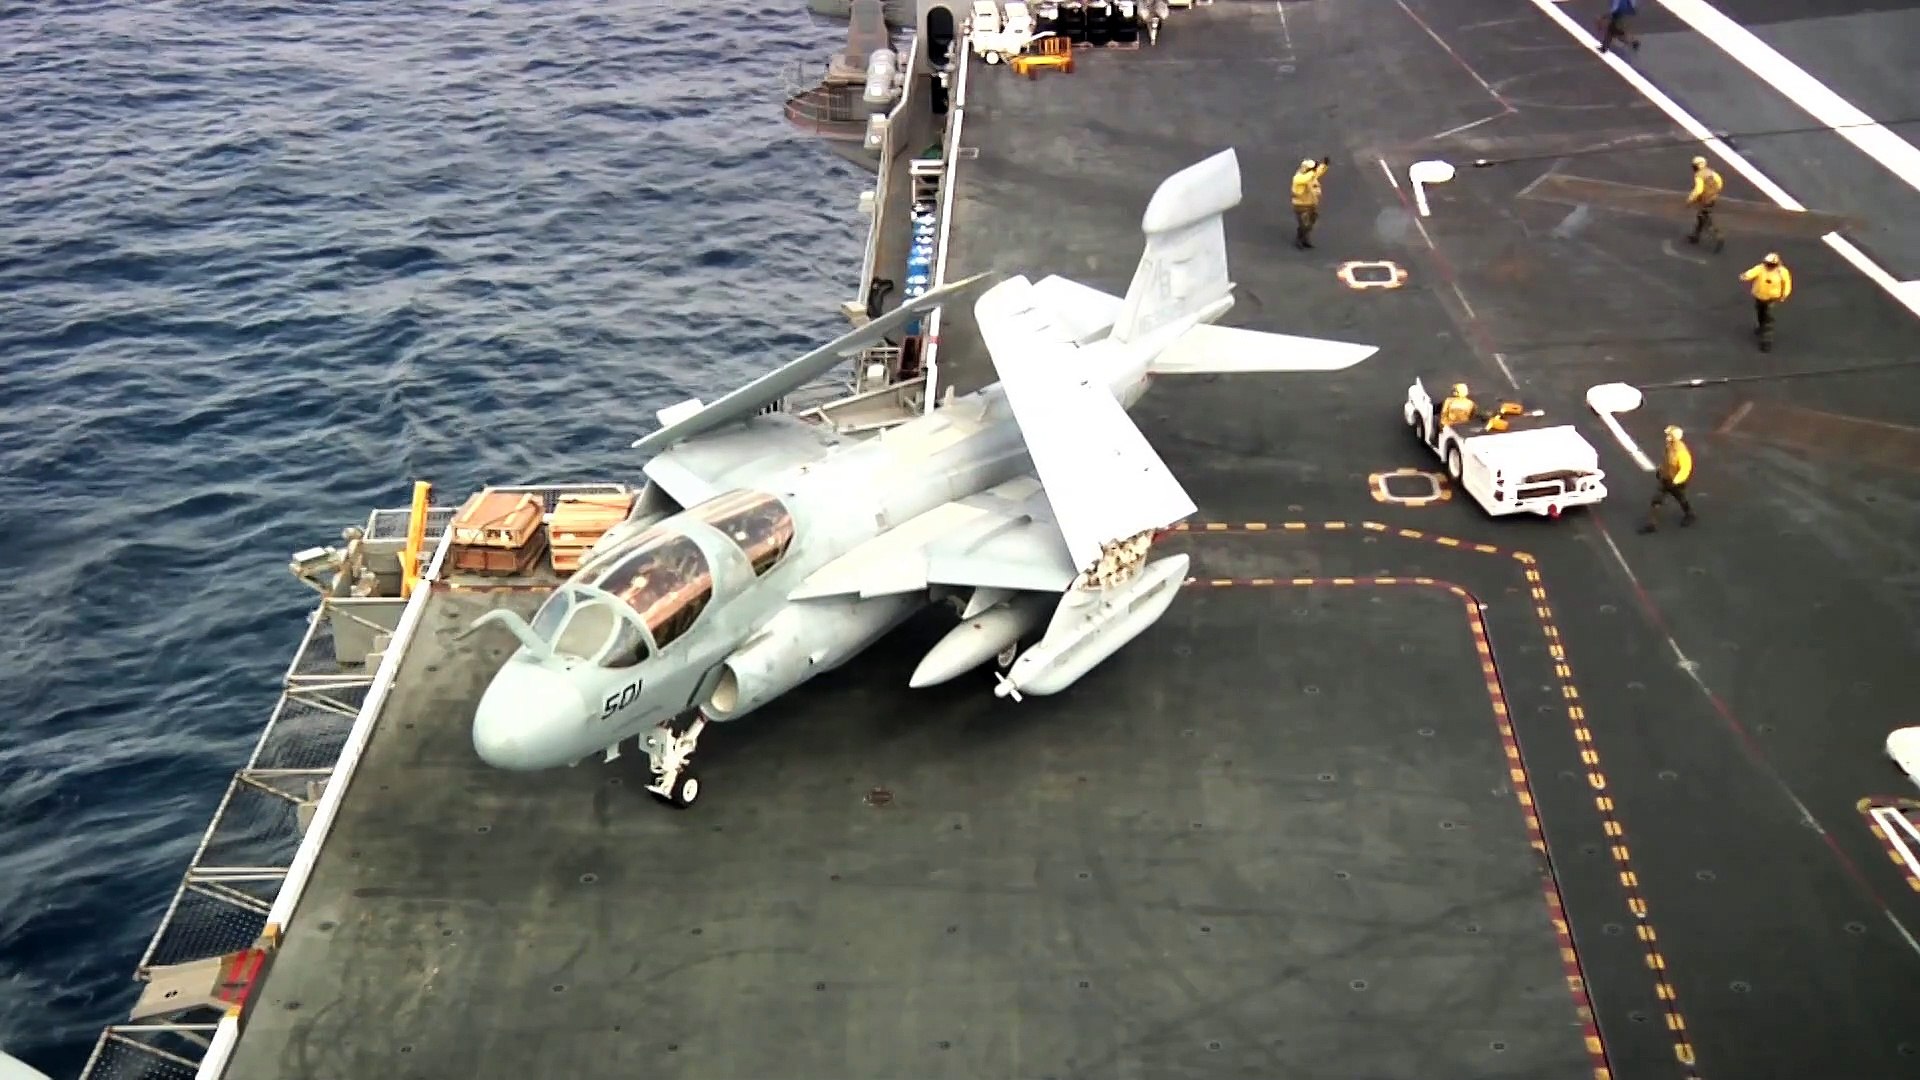 Awesome Footage • Navy Aircraft Landing on a Moving Aircraft Carrier